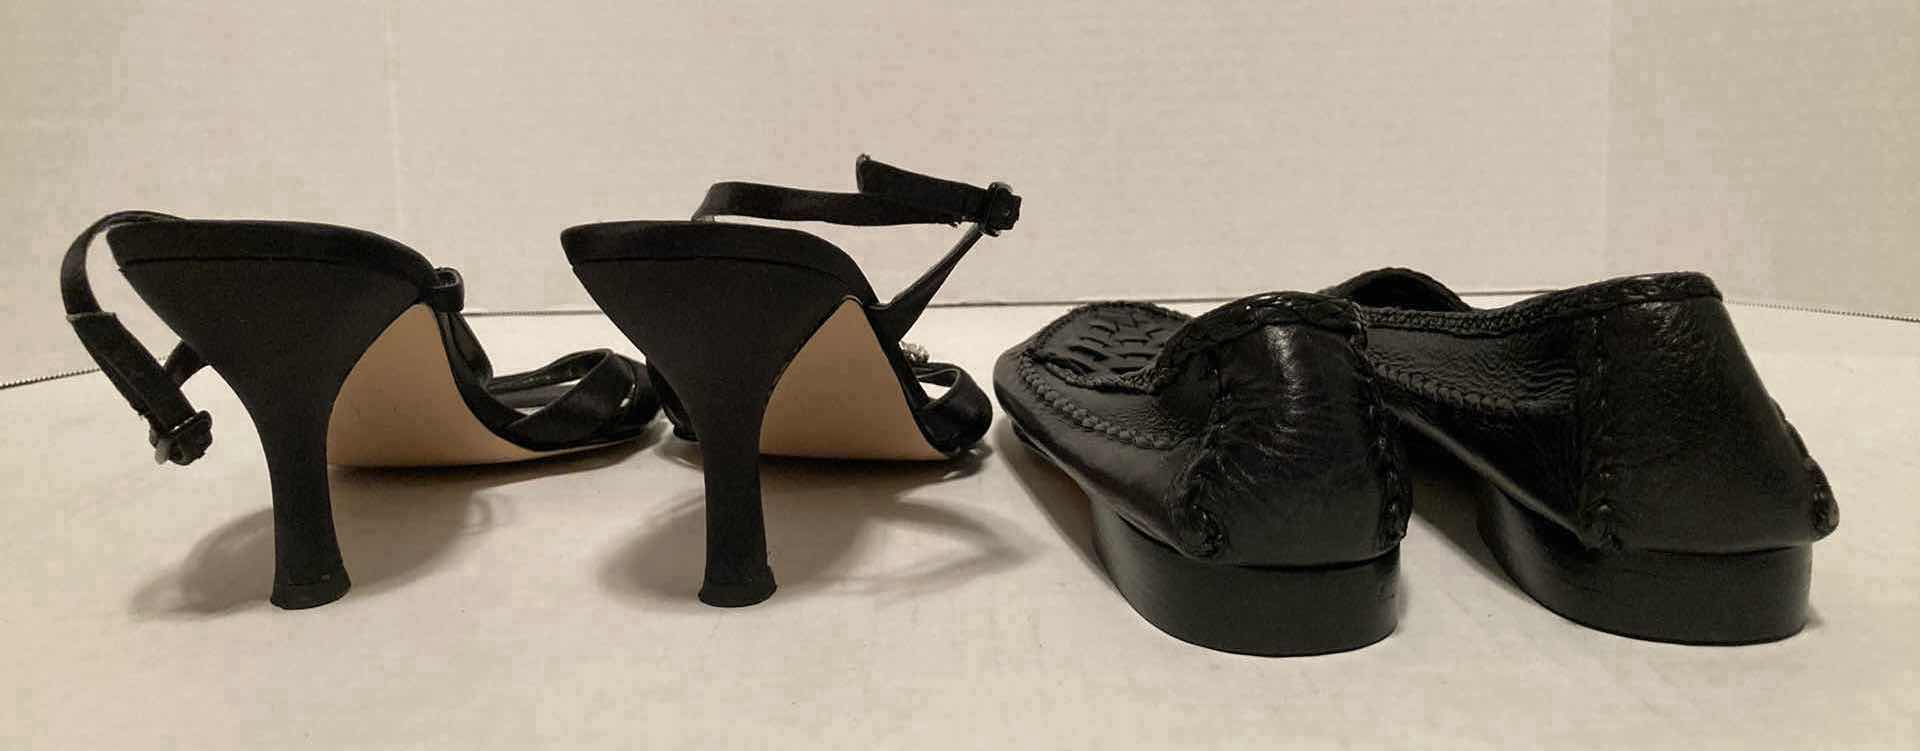 Photo 5 of CAPARROS BLACK OPEN TOE HEELS & COLE HAAN BLACK WOVEN LEATHER LOAFERS WOMEN’S SIZE 8-8.5